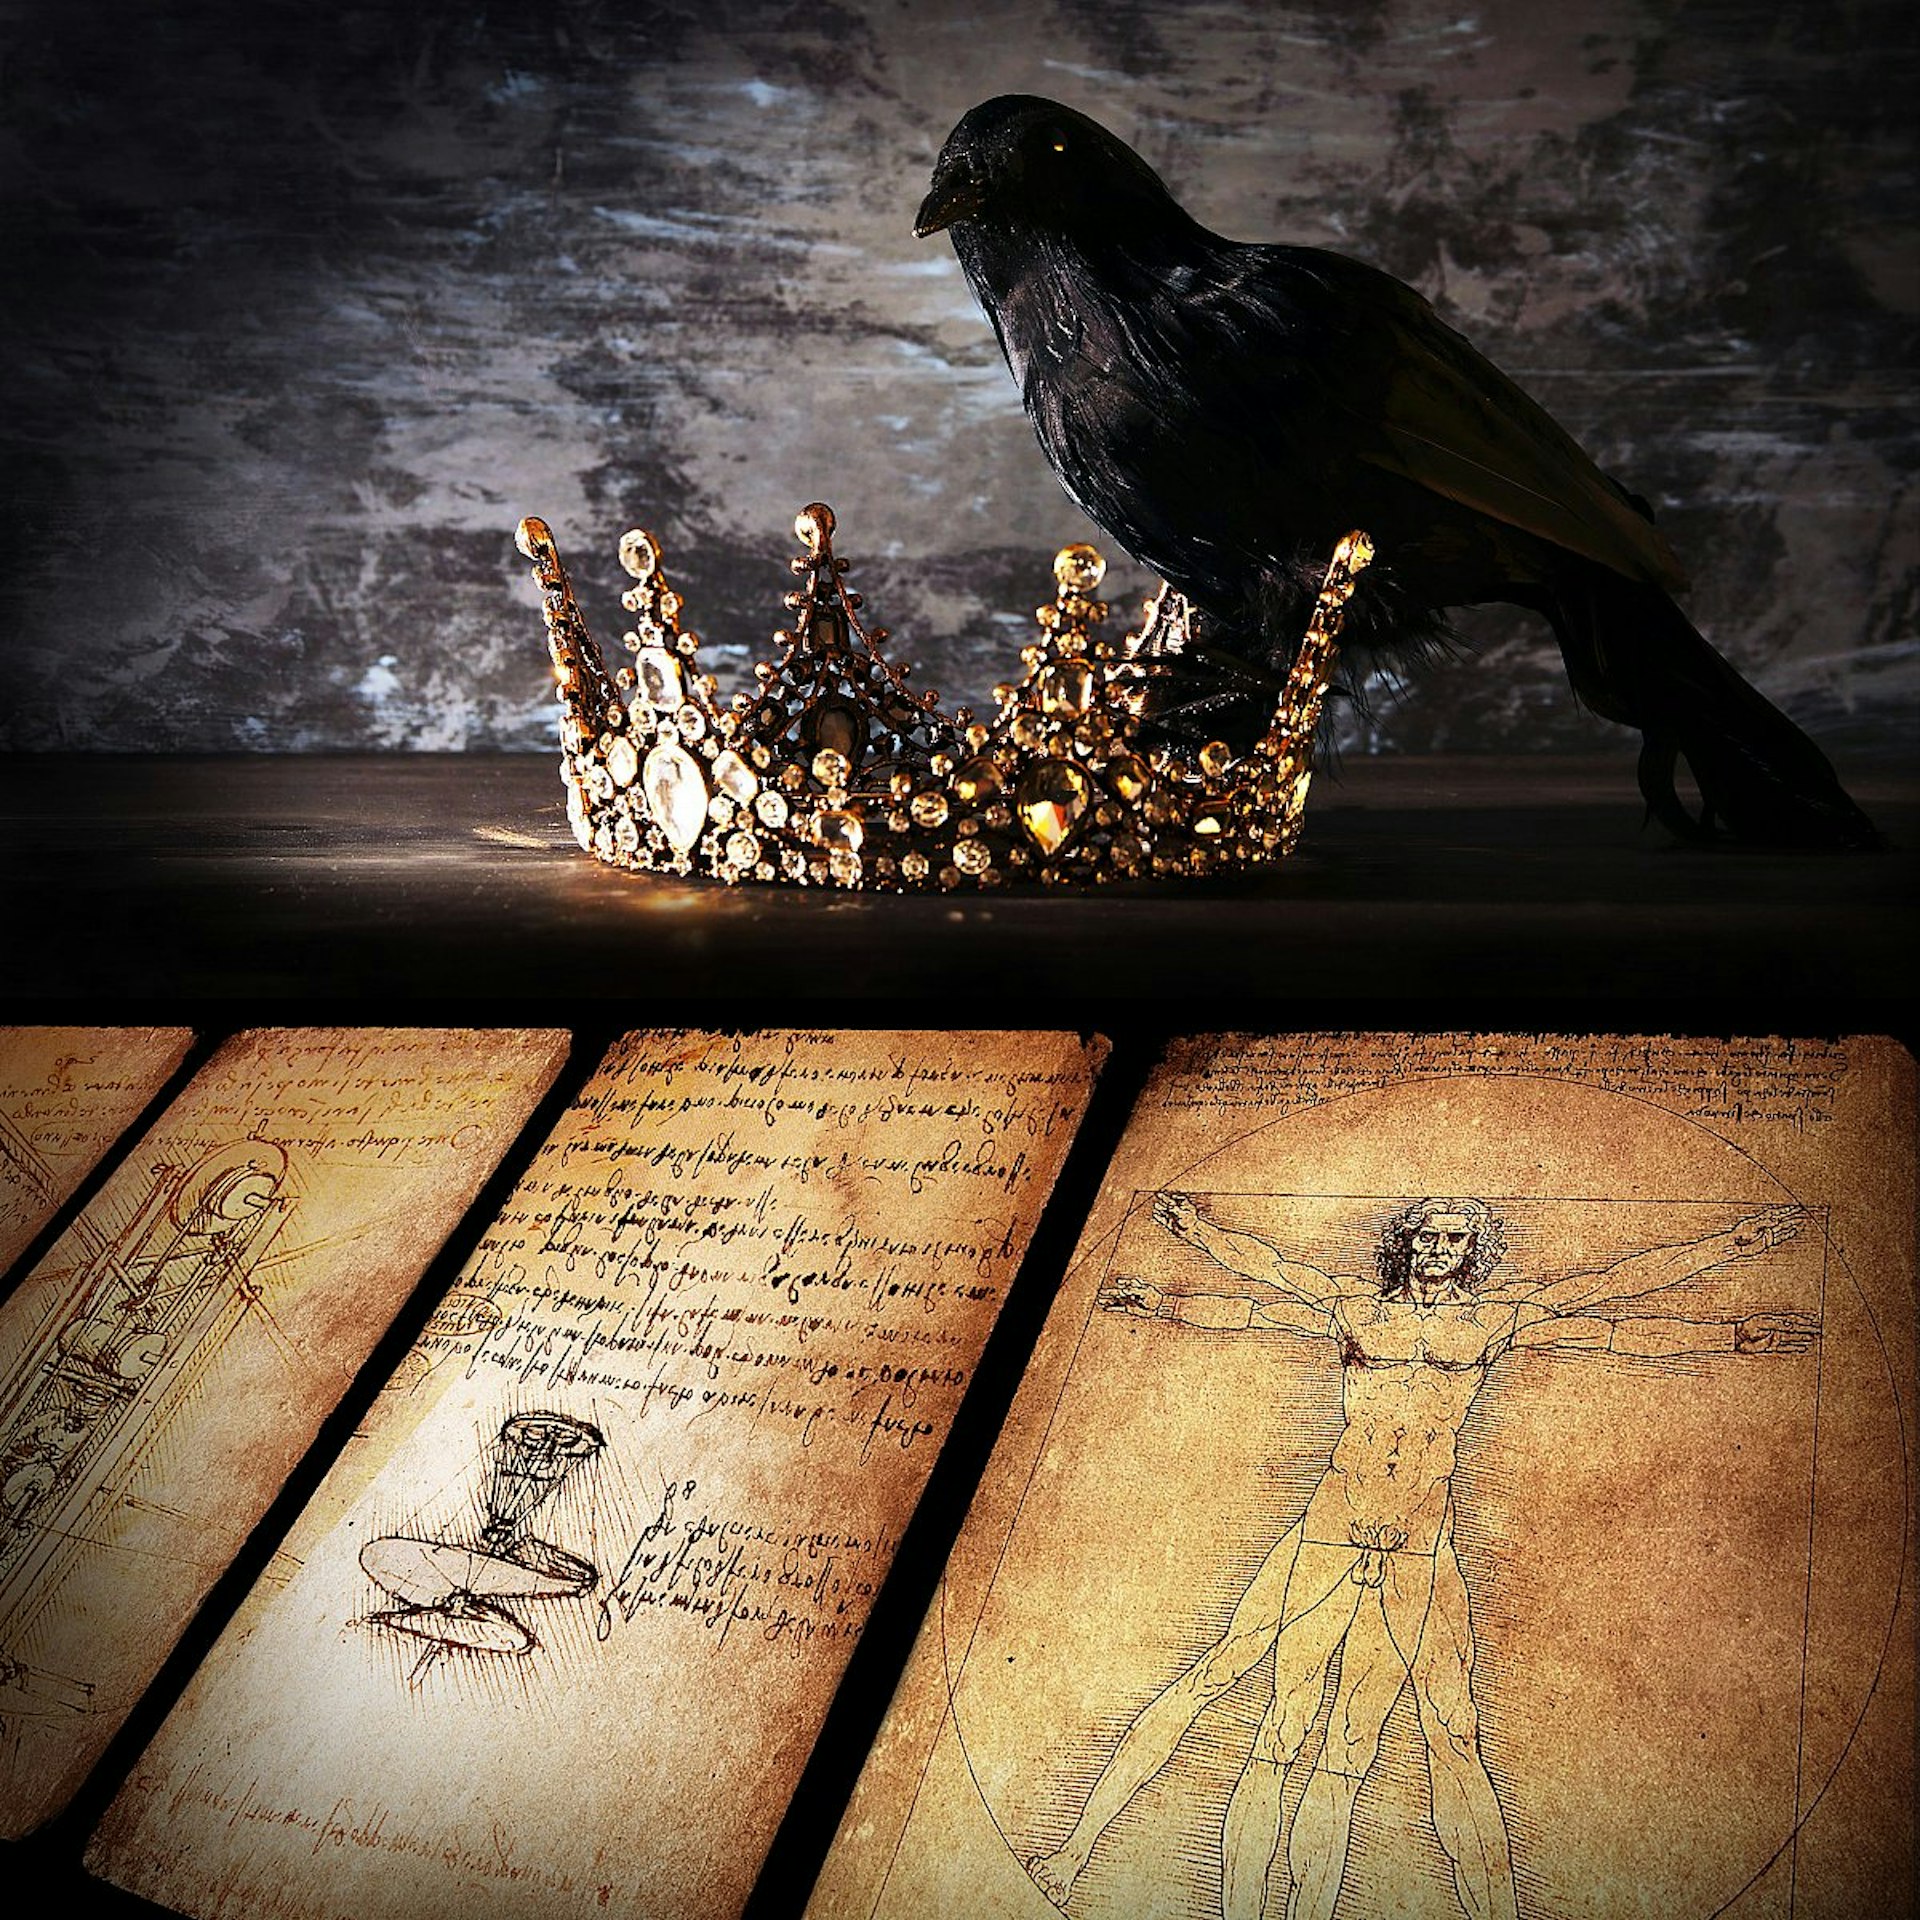 In the upper half of the photo, a huge black crow sits next to a bejewelled gold crown; the lower half shows a replica of a medieval-style parchment covered in faux-scientific diagrams and a cursive script.